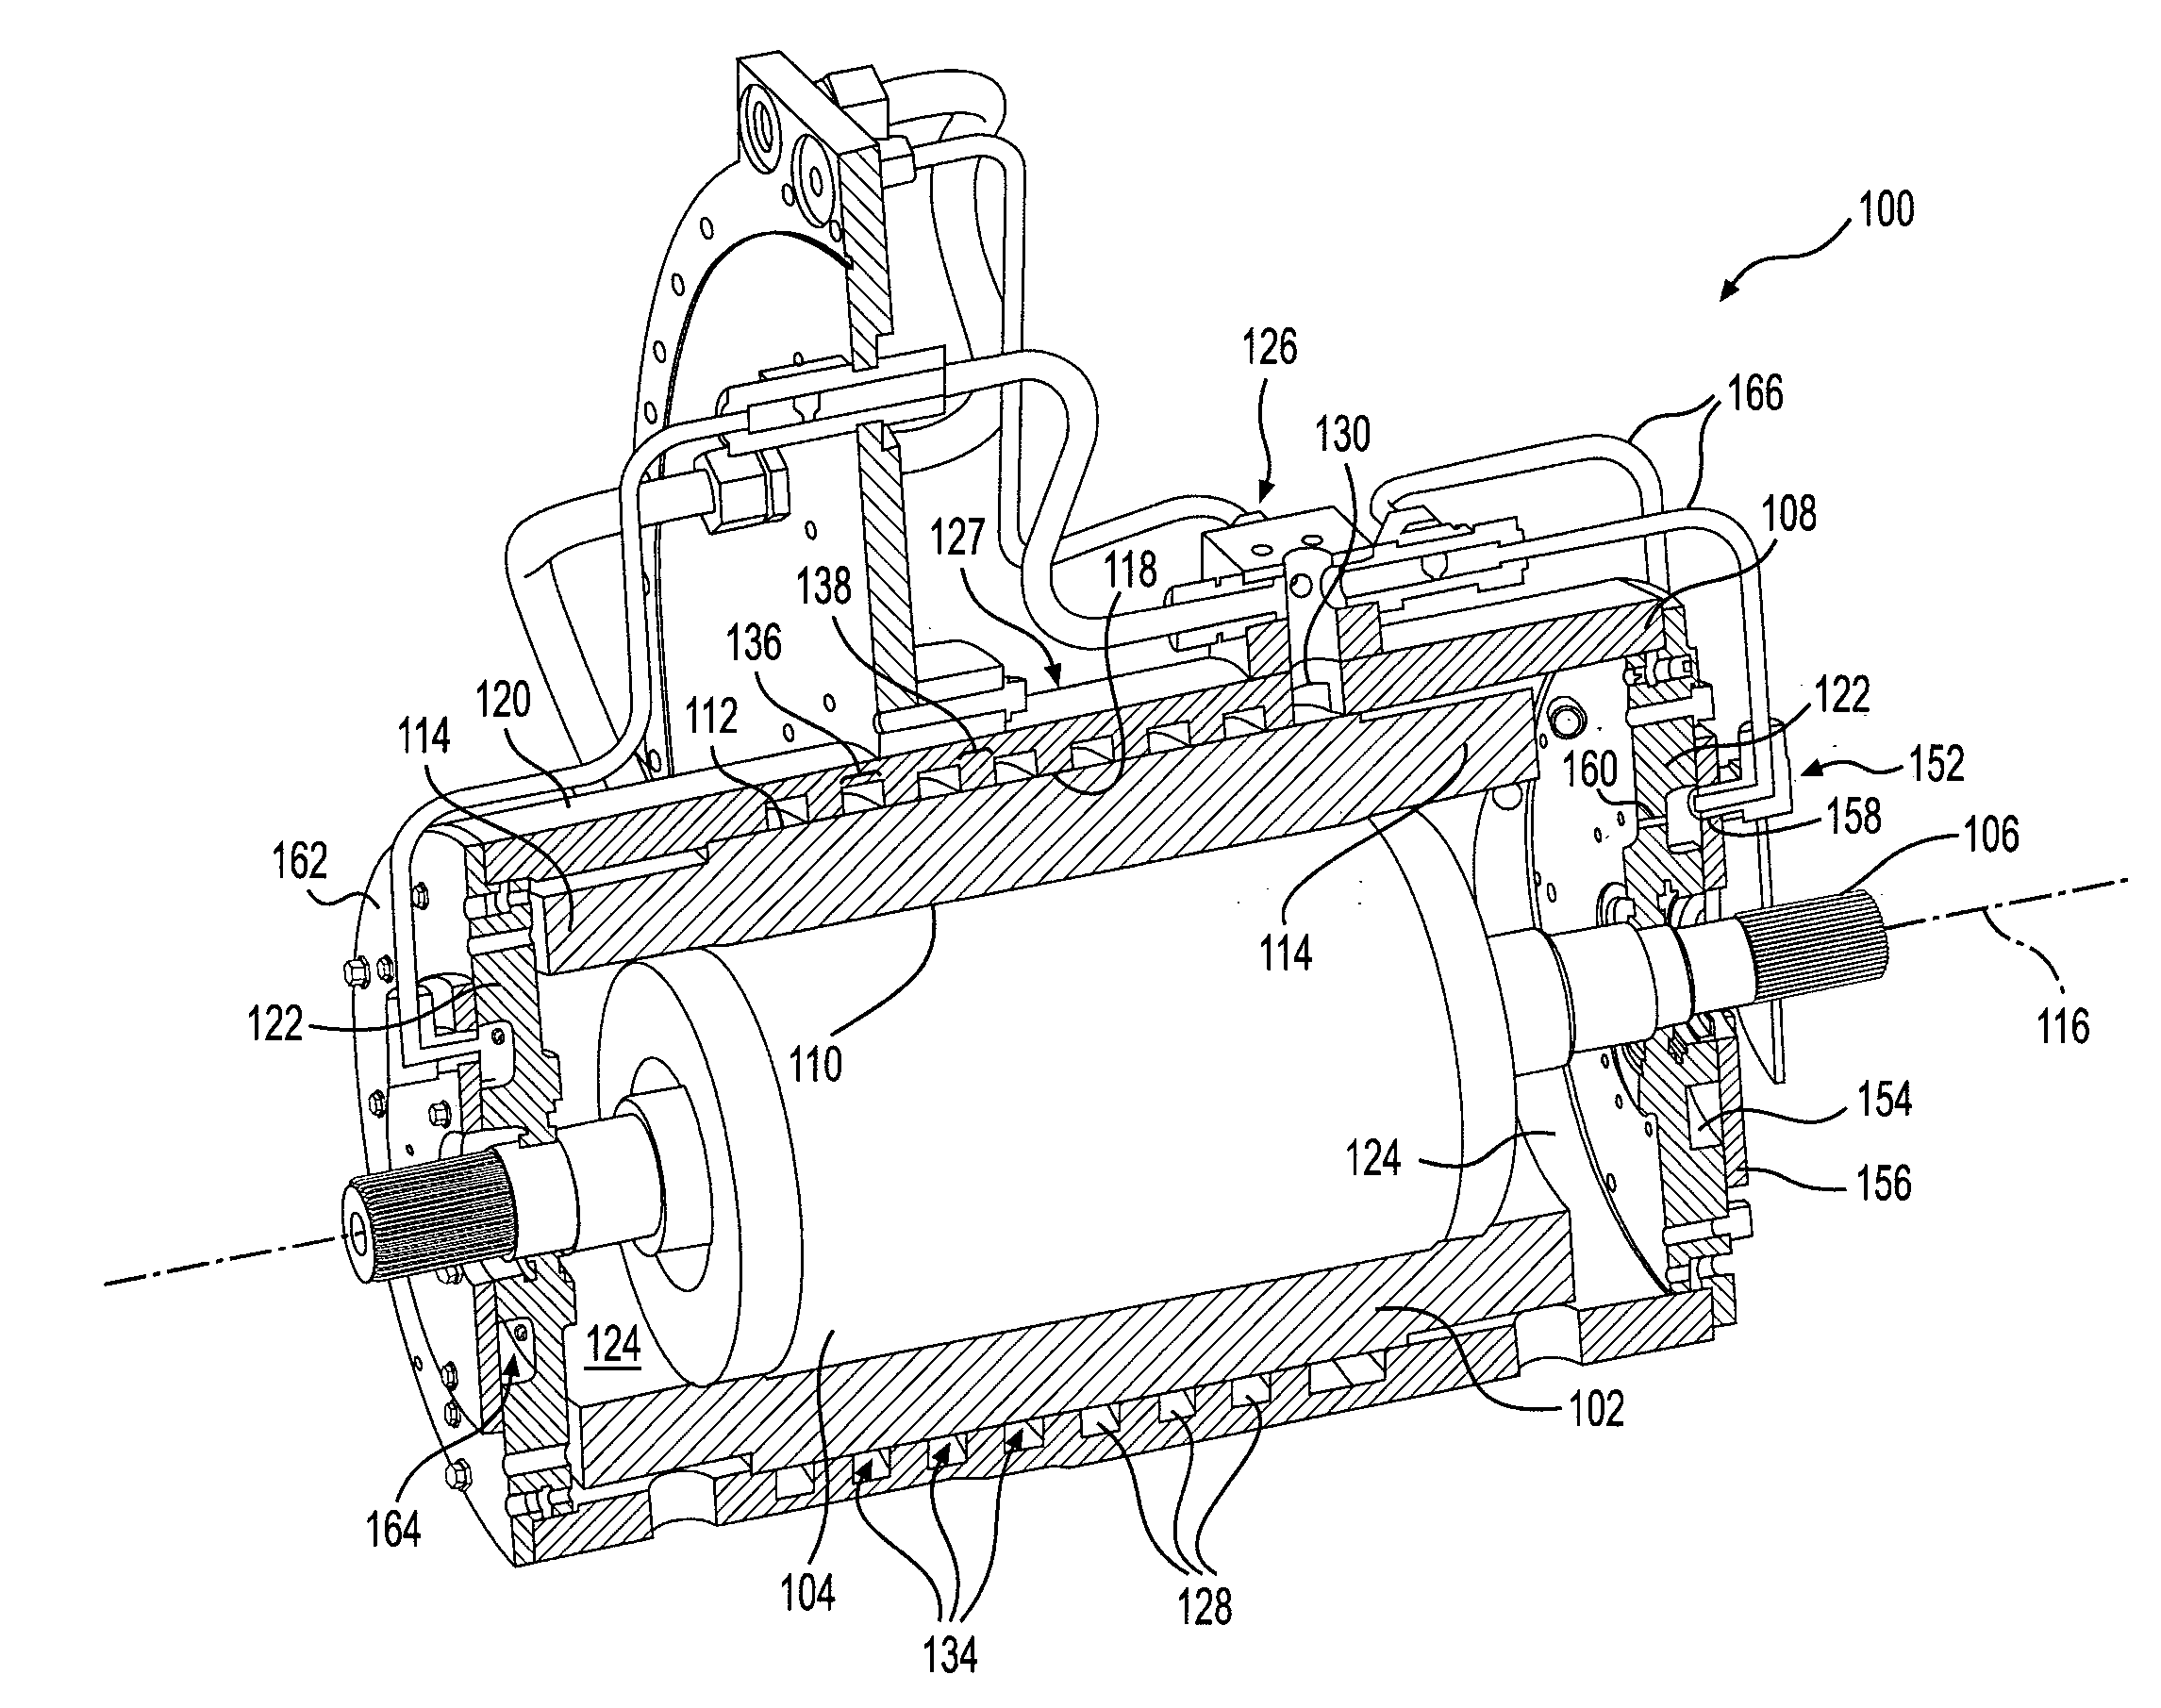 Cooling system for an electric motor